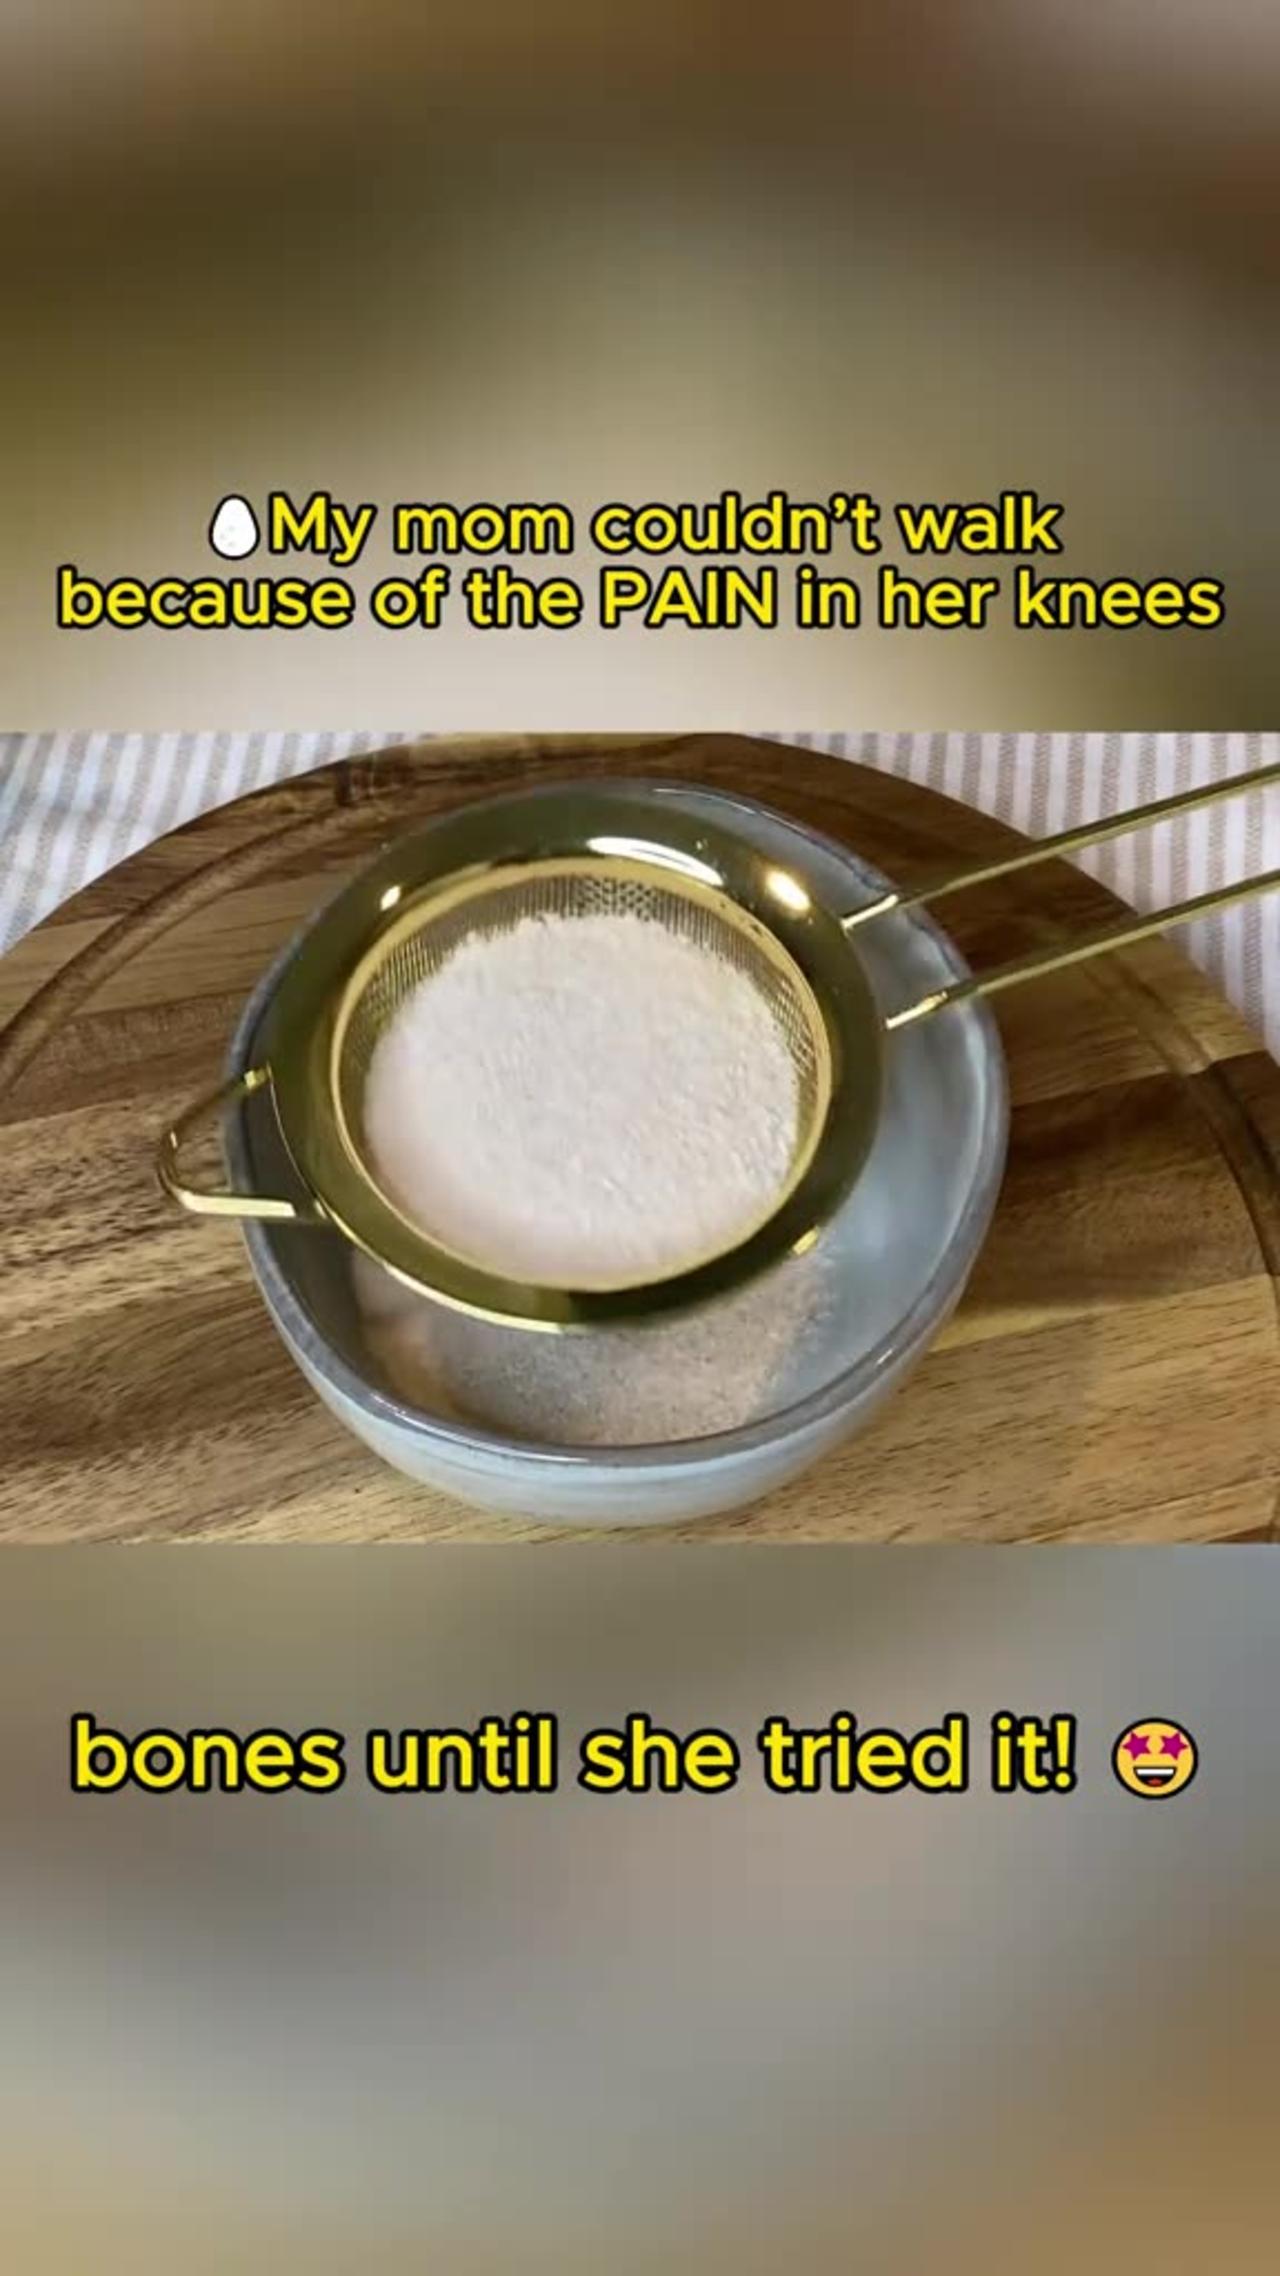 My mom couldn't walk because of the PAIN in her knees